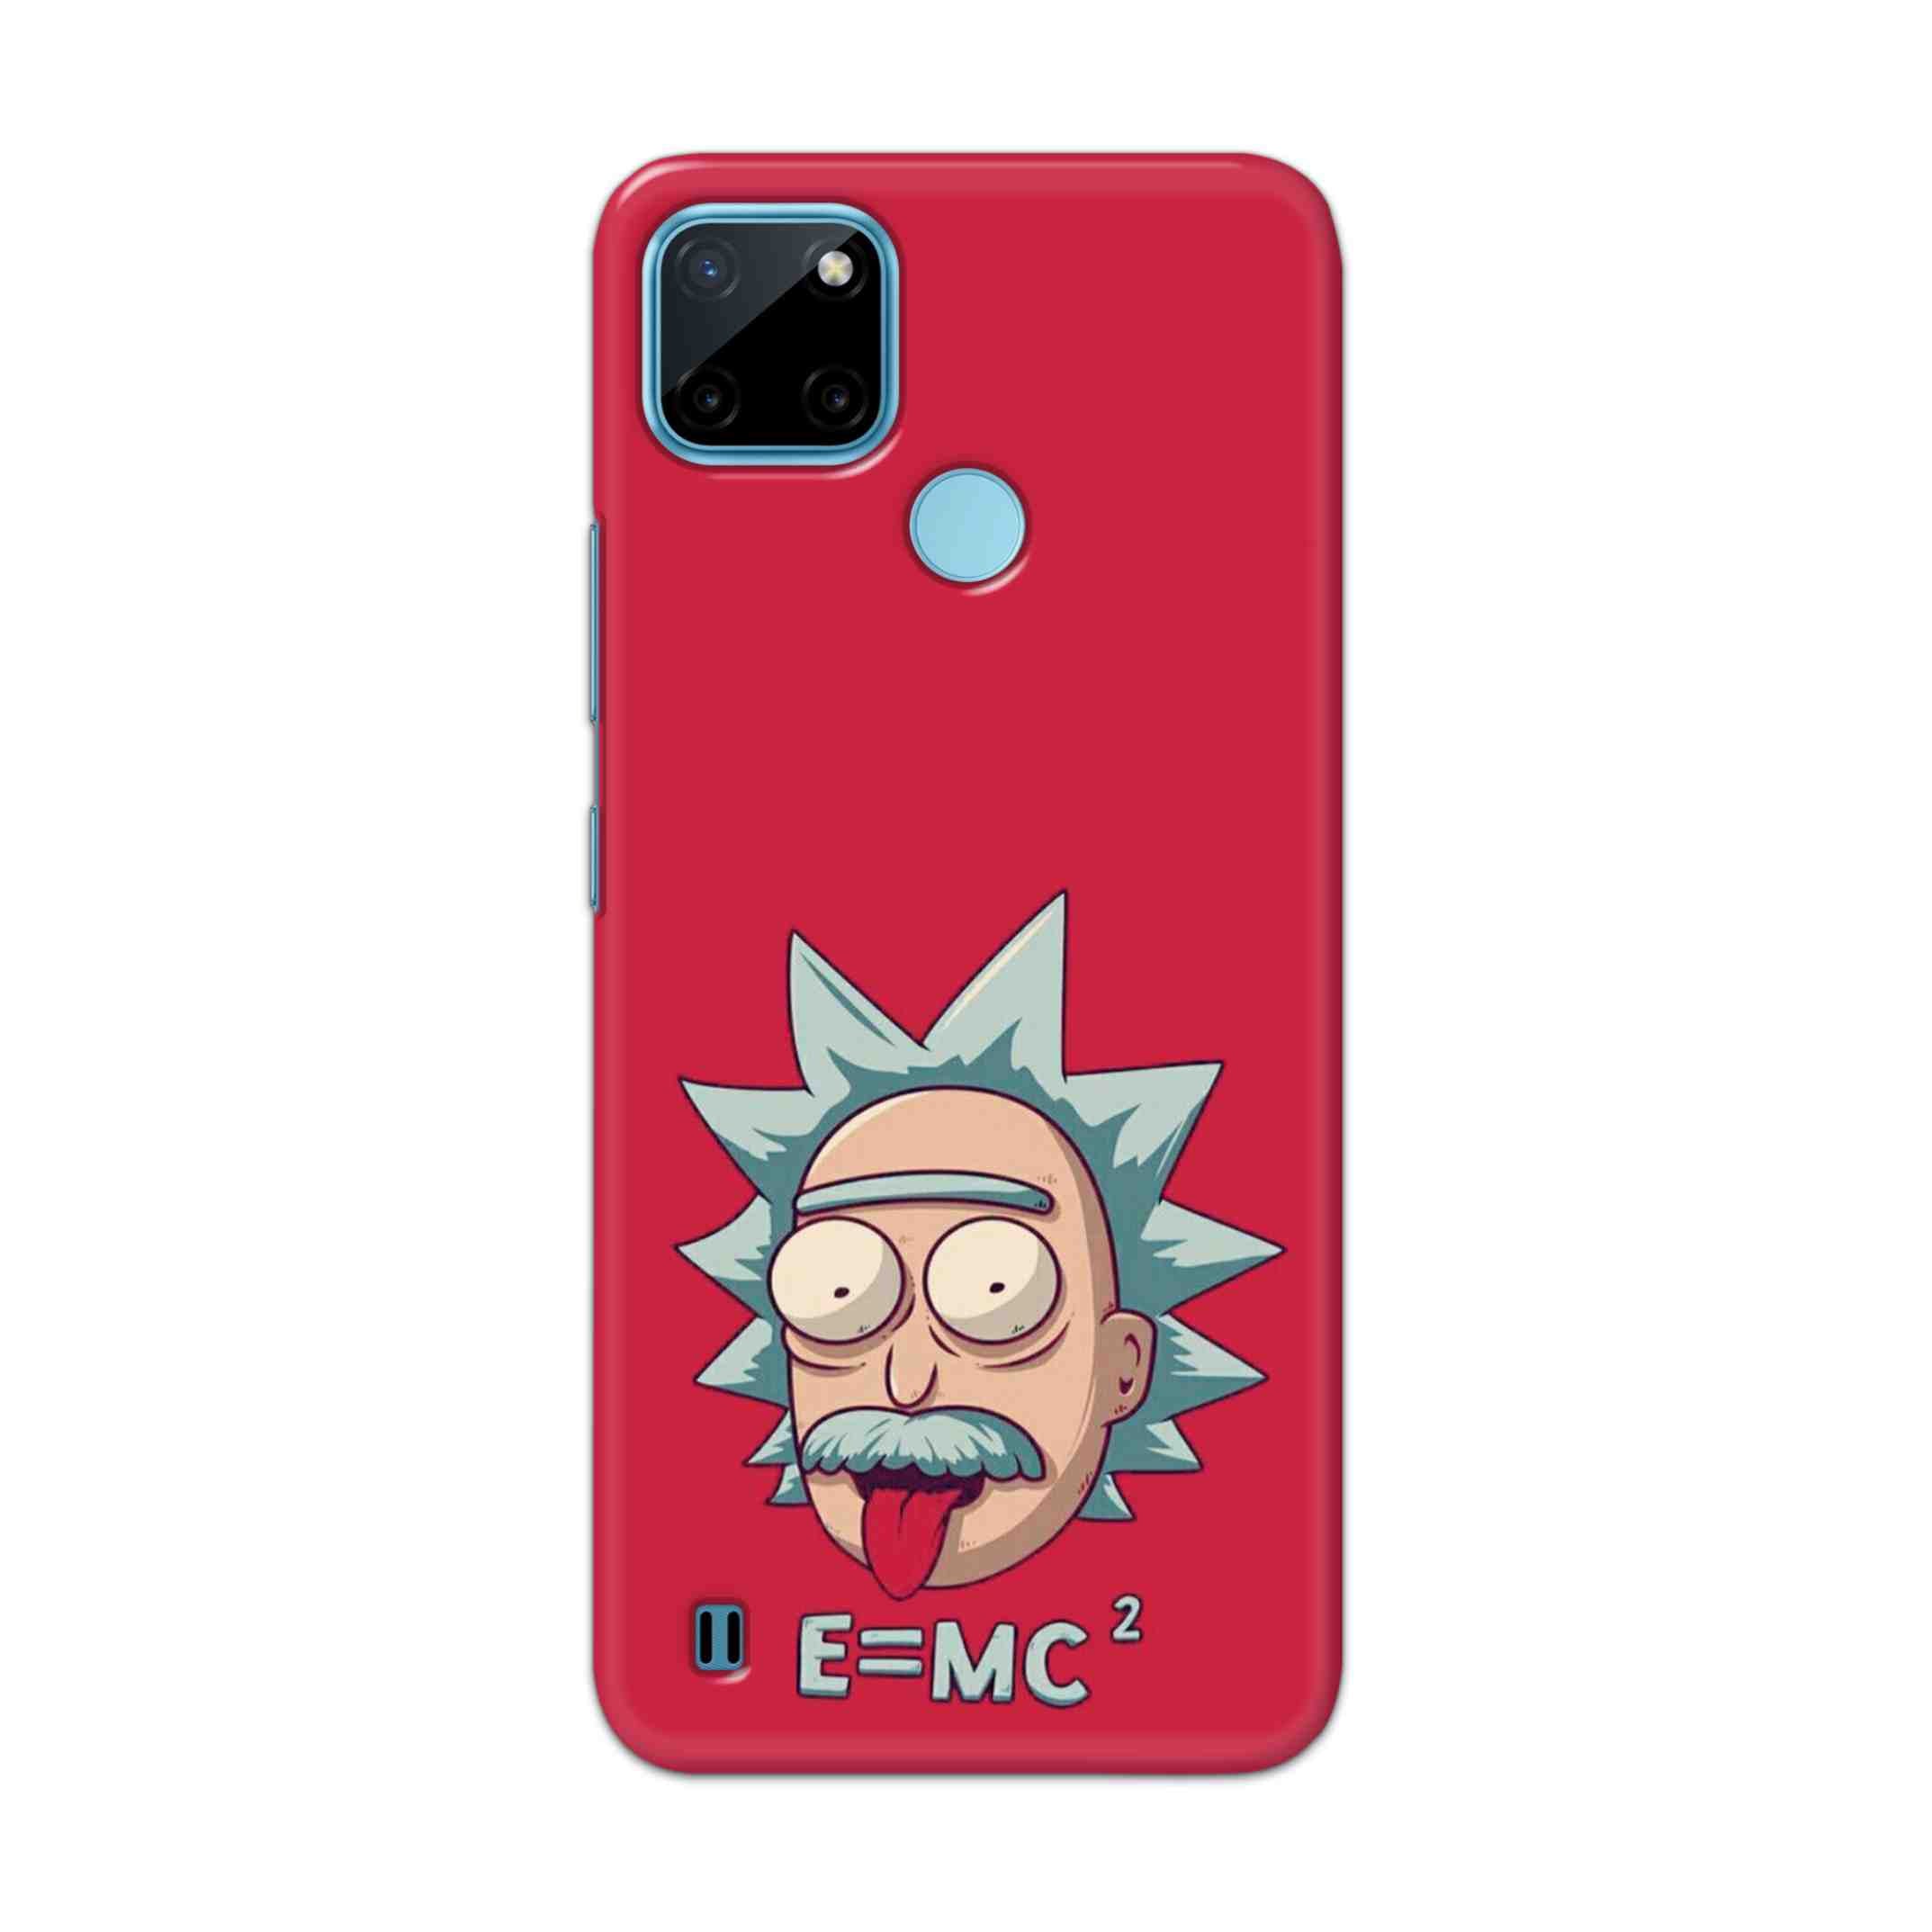 Buy E=Mc Hard Back Mobile Phone Case Cover For Realme C21Y Online